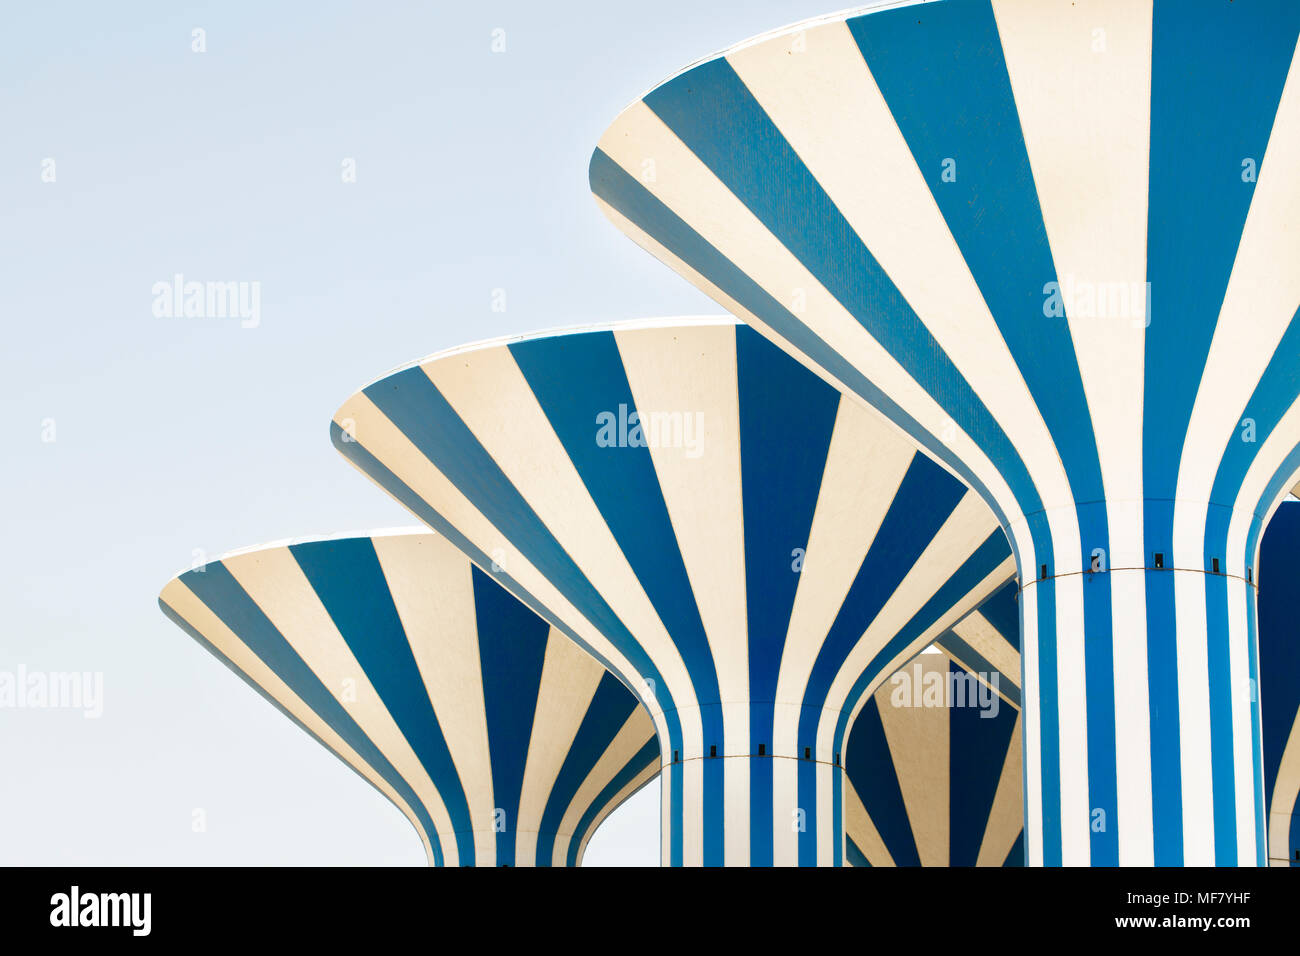 Water towers in Kuwait. Modern Kuwaiti architecture in blue and white stripes, set against a cloudless Kuwaiti sky. Stock Photo